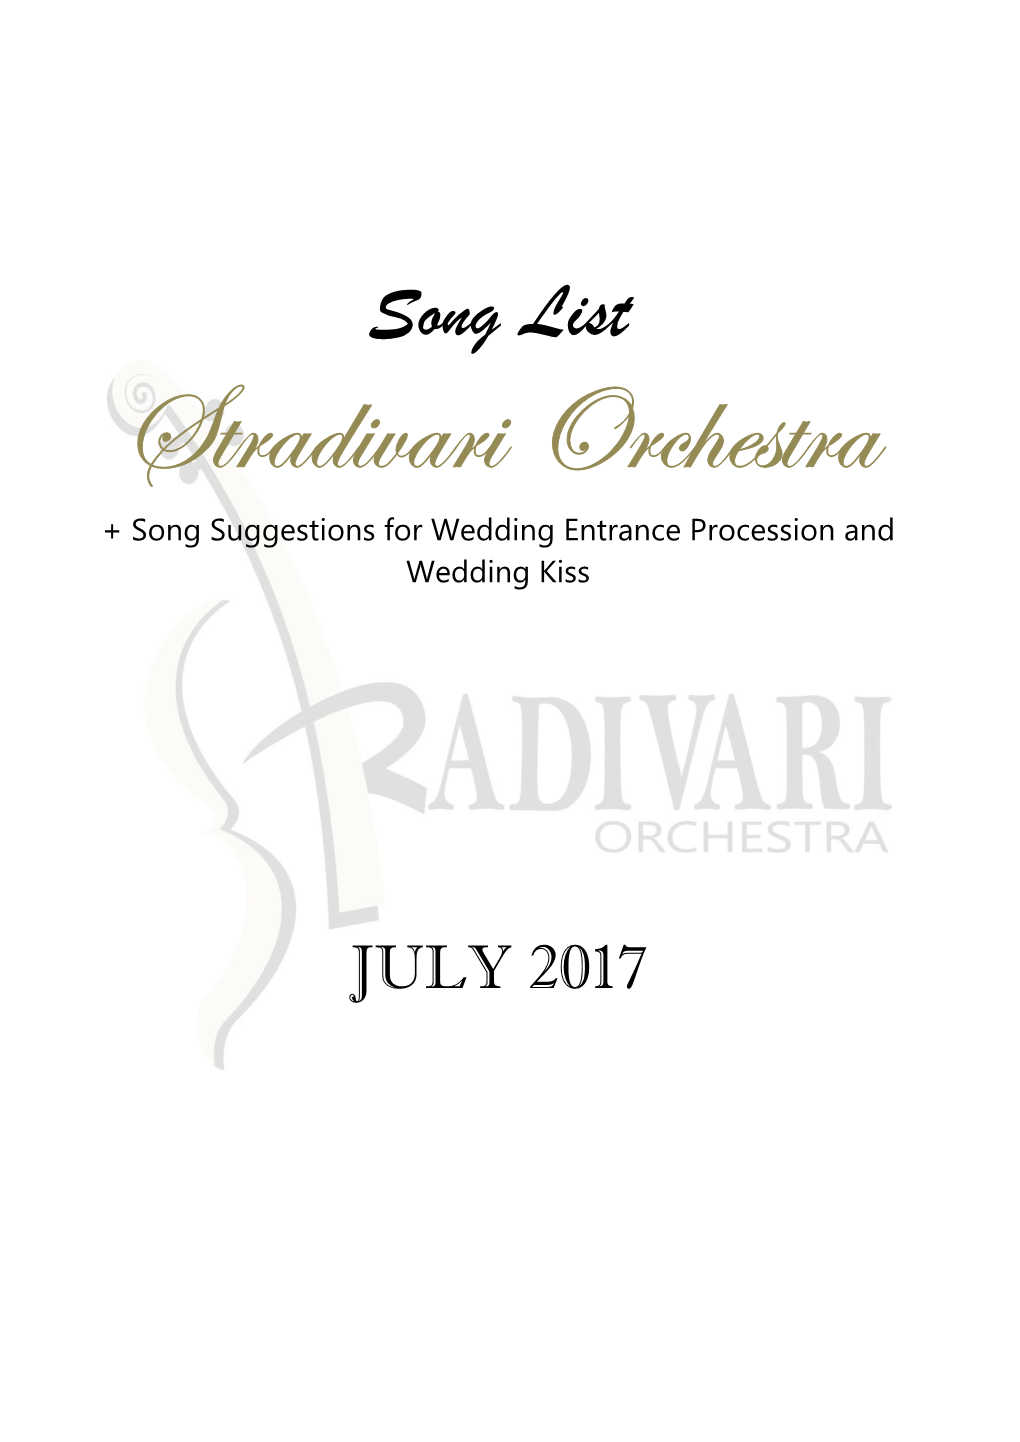 Song List Stradivari Orchestra + Song Suggestions for Wedding Entrance Procession and Wedding Kiss